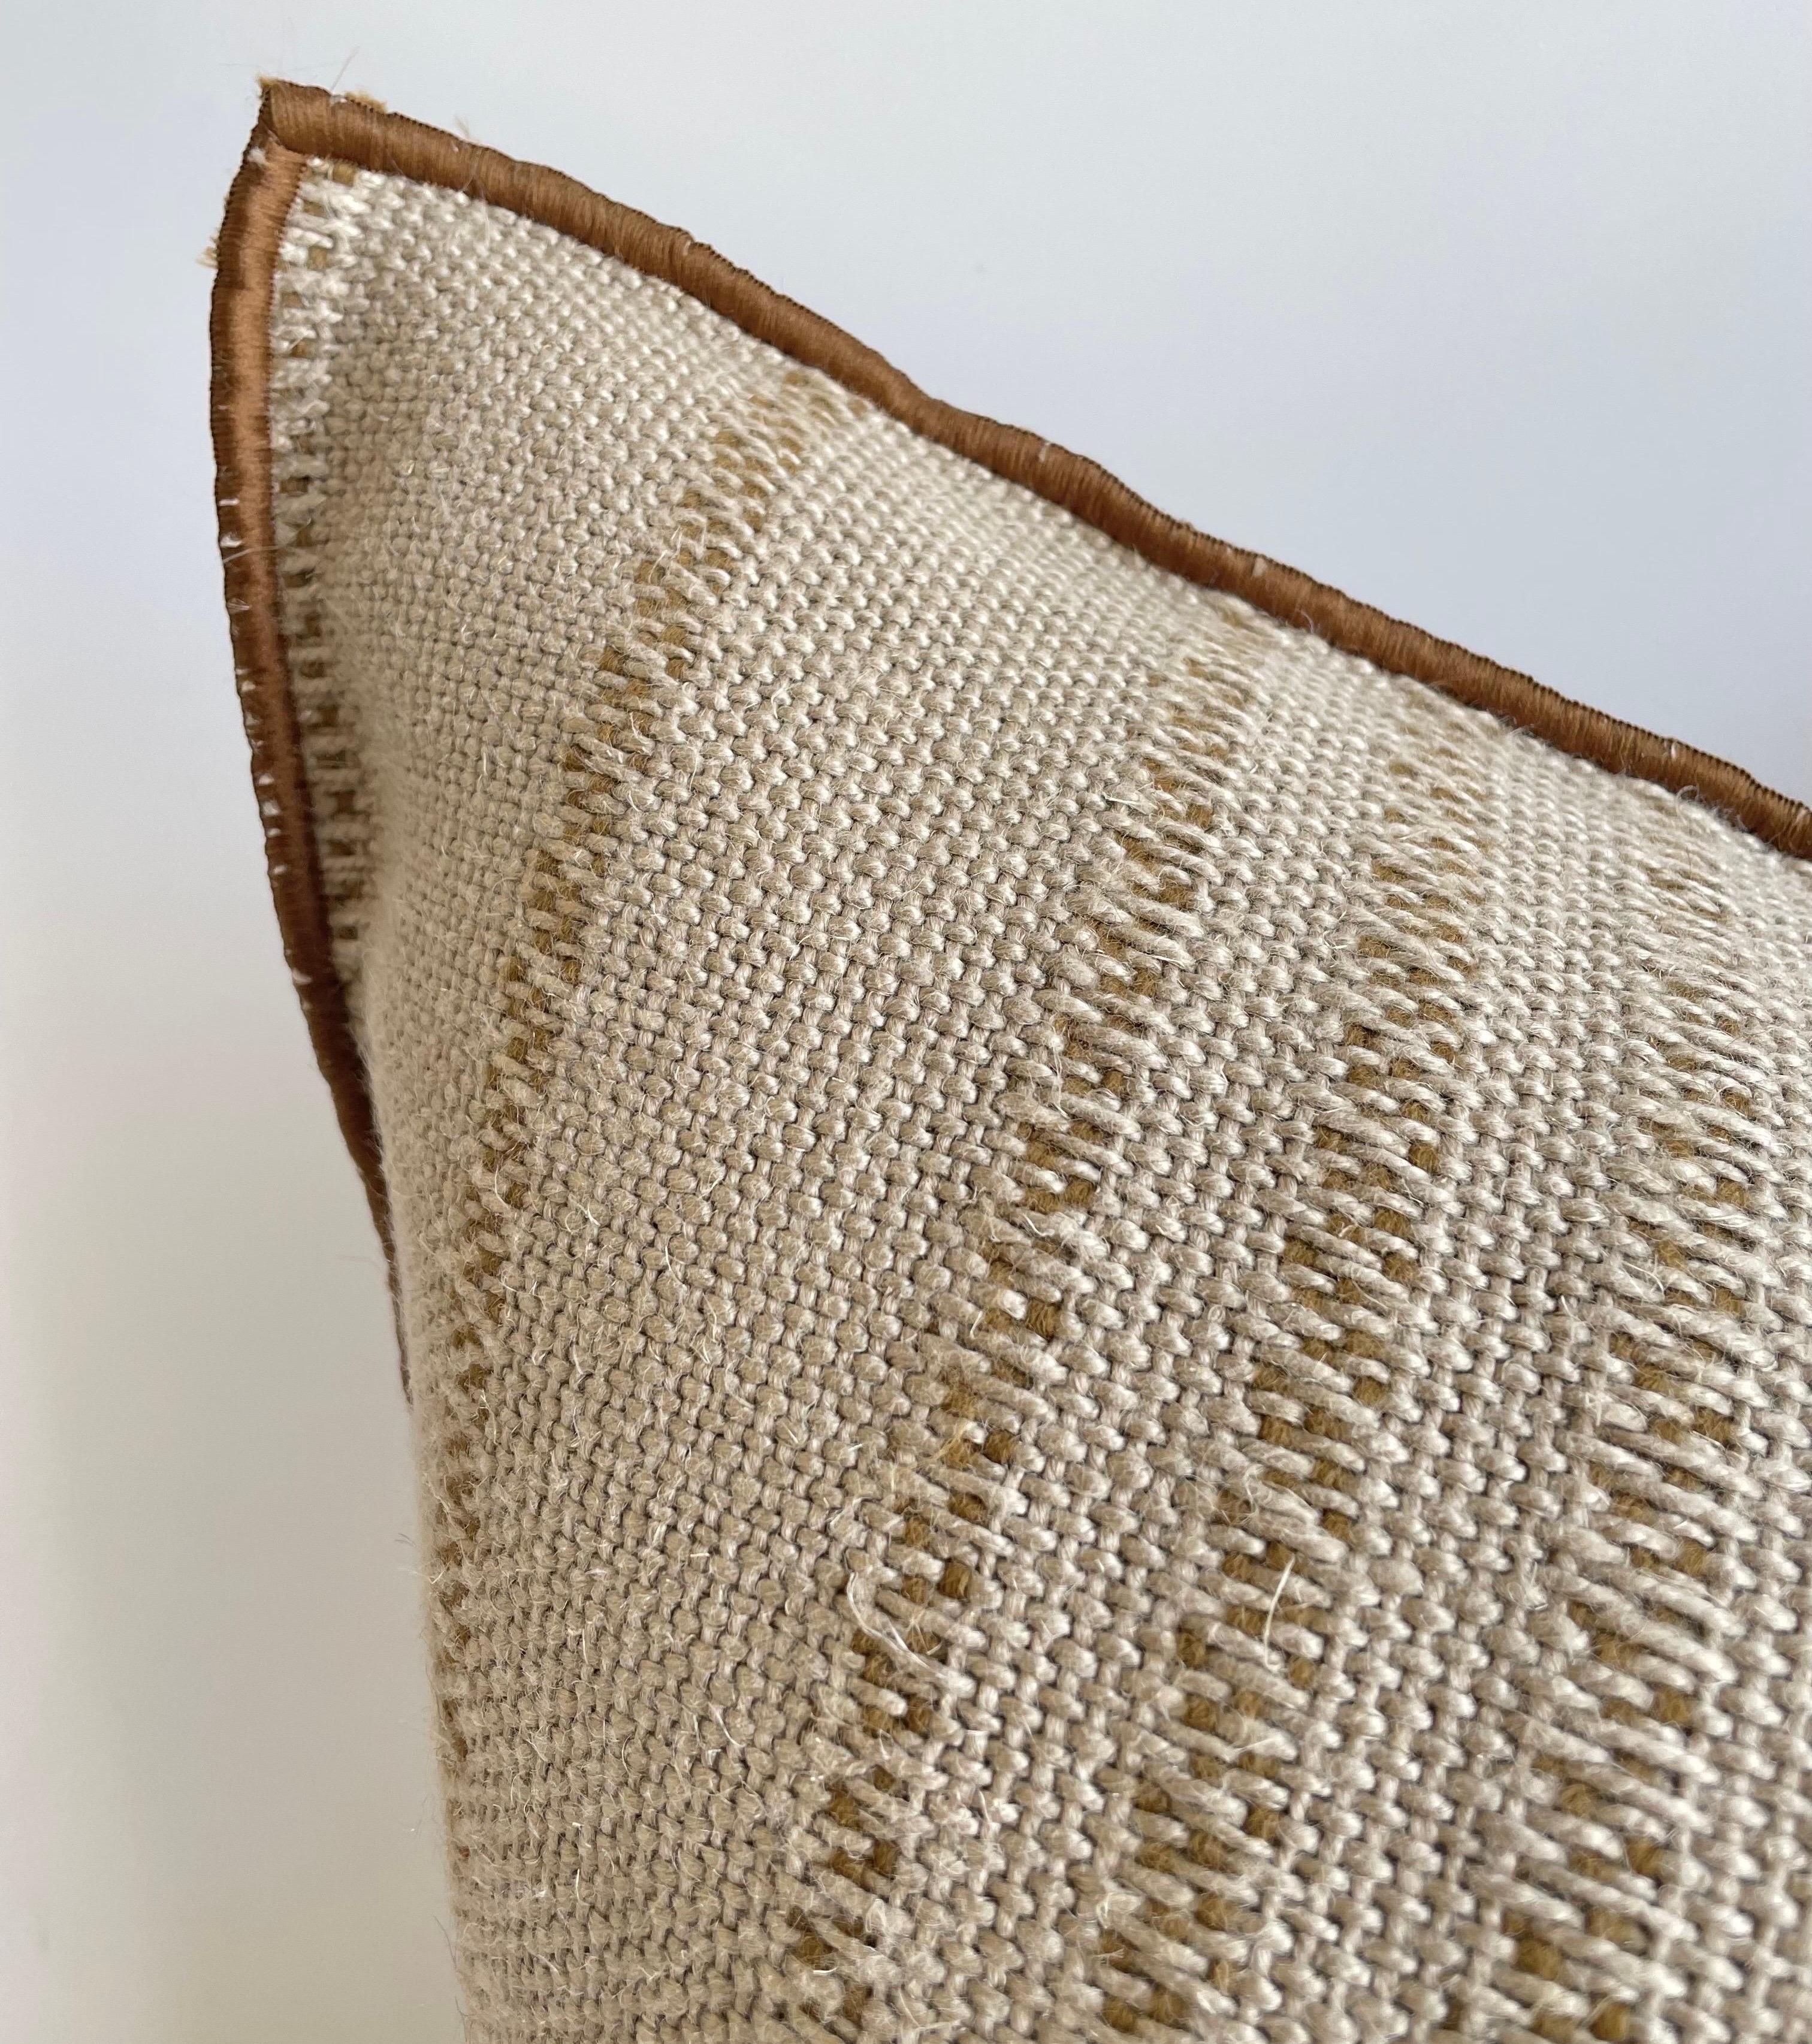 Custom made to order linen pillows from France
Beautiful natural flax heavy weight linen backing with a deep dark mustard gold embroidered stripe pattern, and custom binded edging.
Brass zipper closure, overlocked edges. Down feather insert not